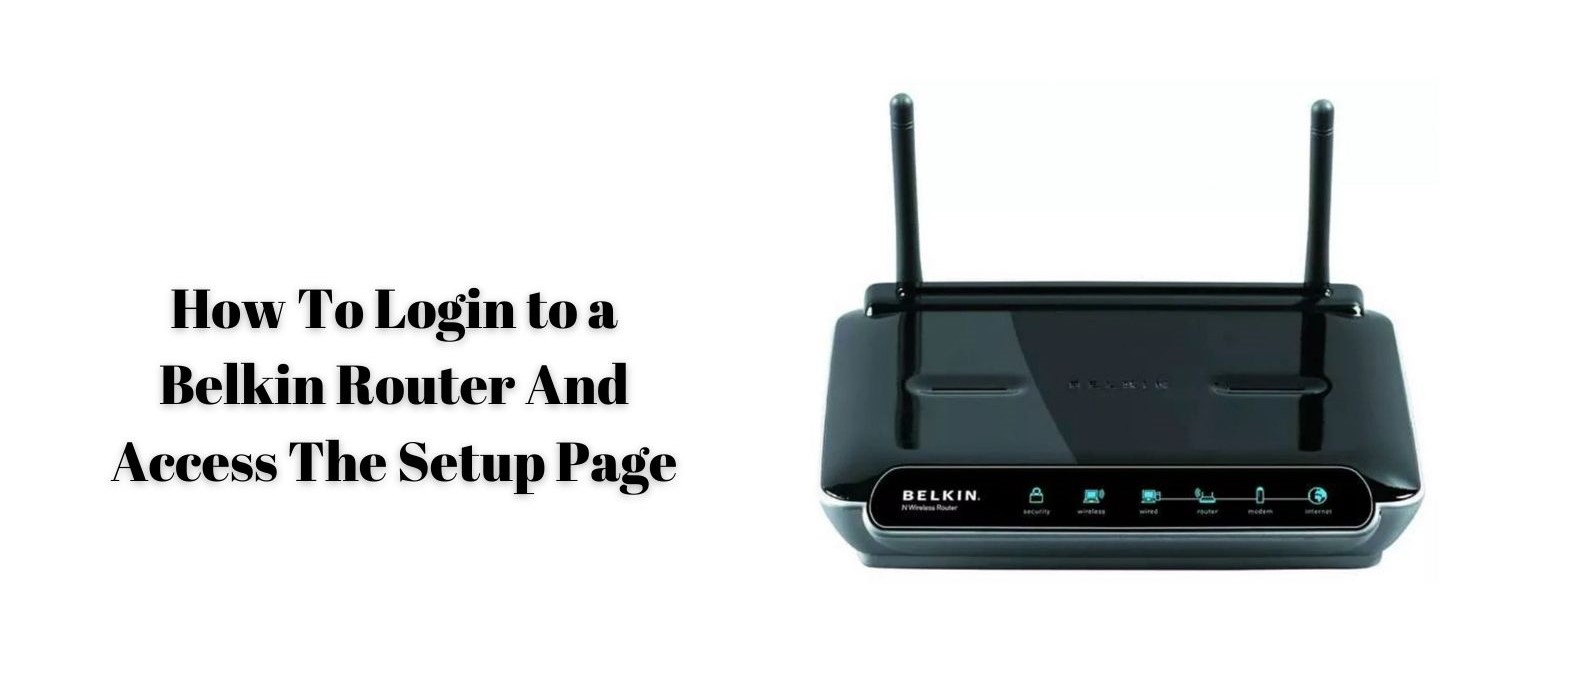 How To Login to a Belkin Router And Access The Setup Page